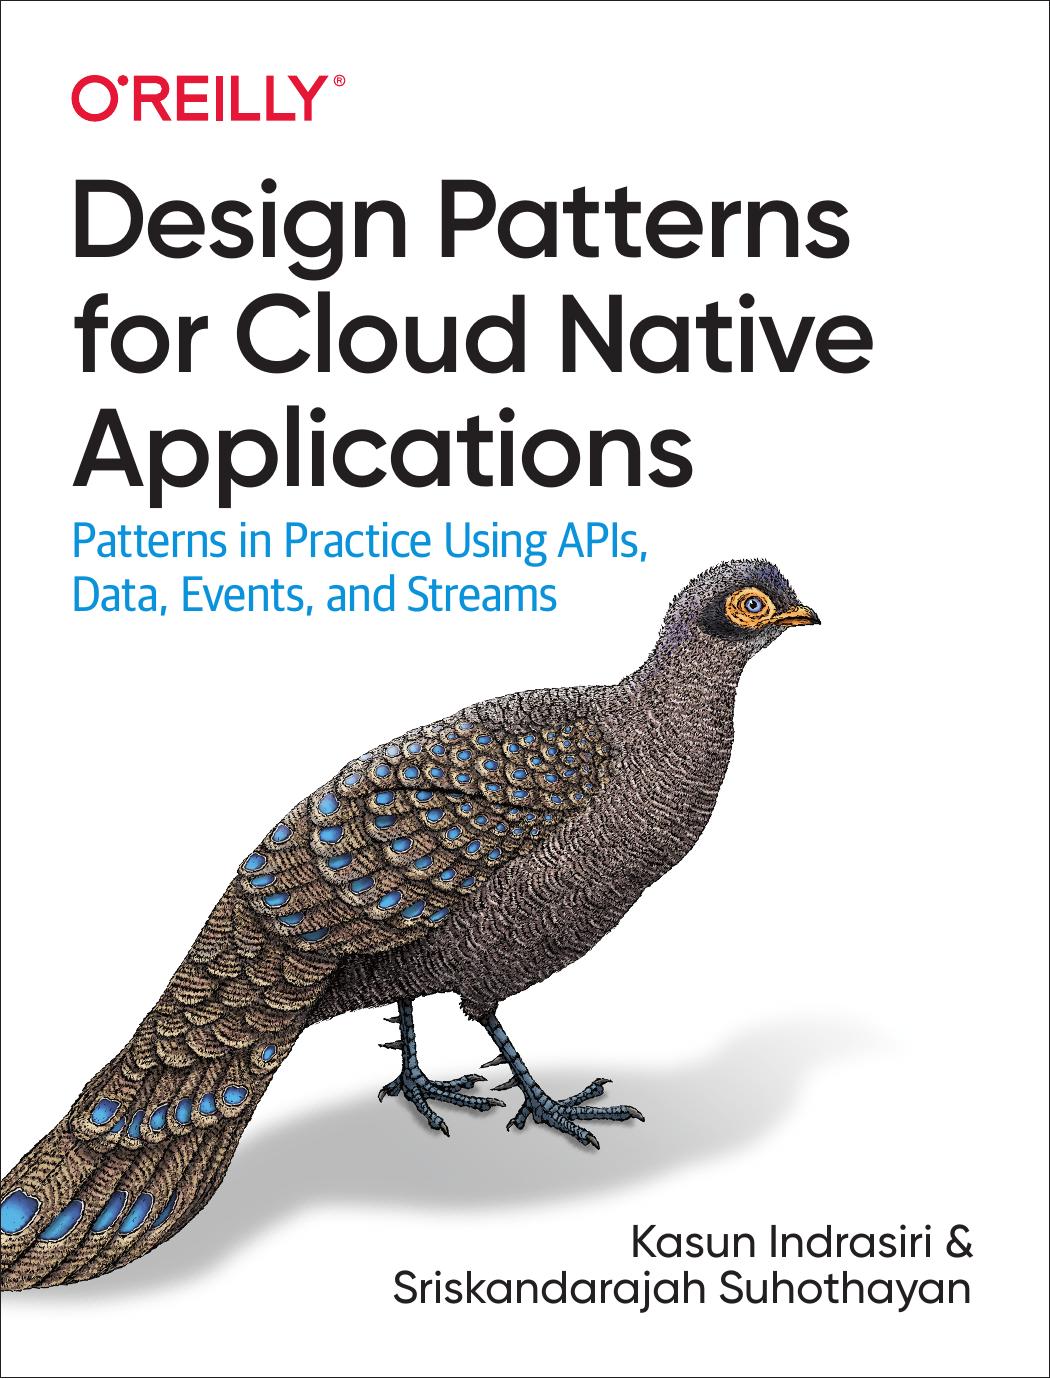 Design Patterns for Cloud Native Applications: Patterns in Practice Using APIs, Data, Events, and Streams